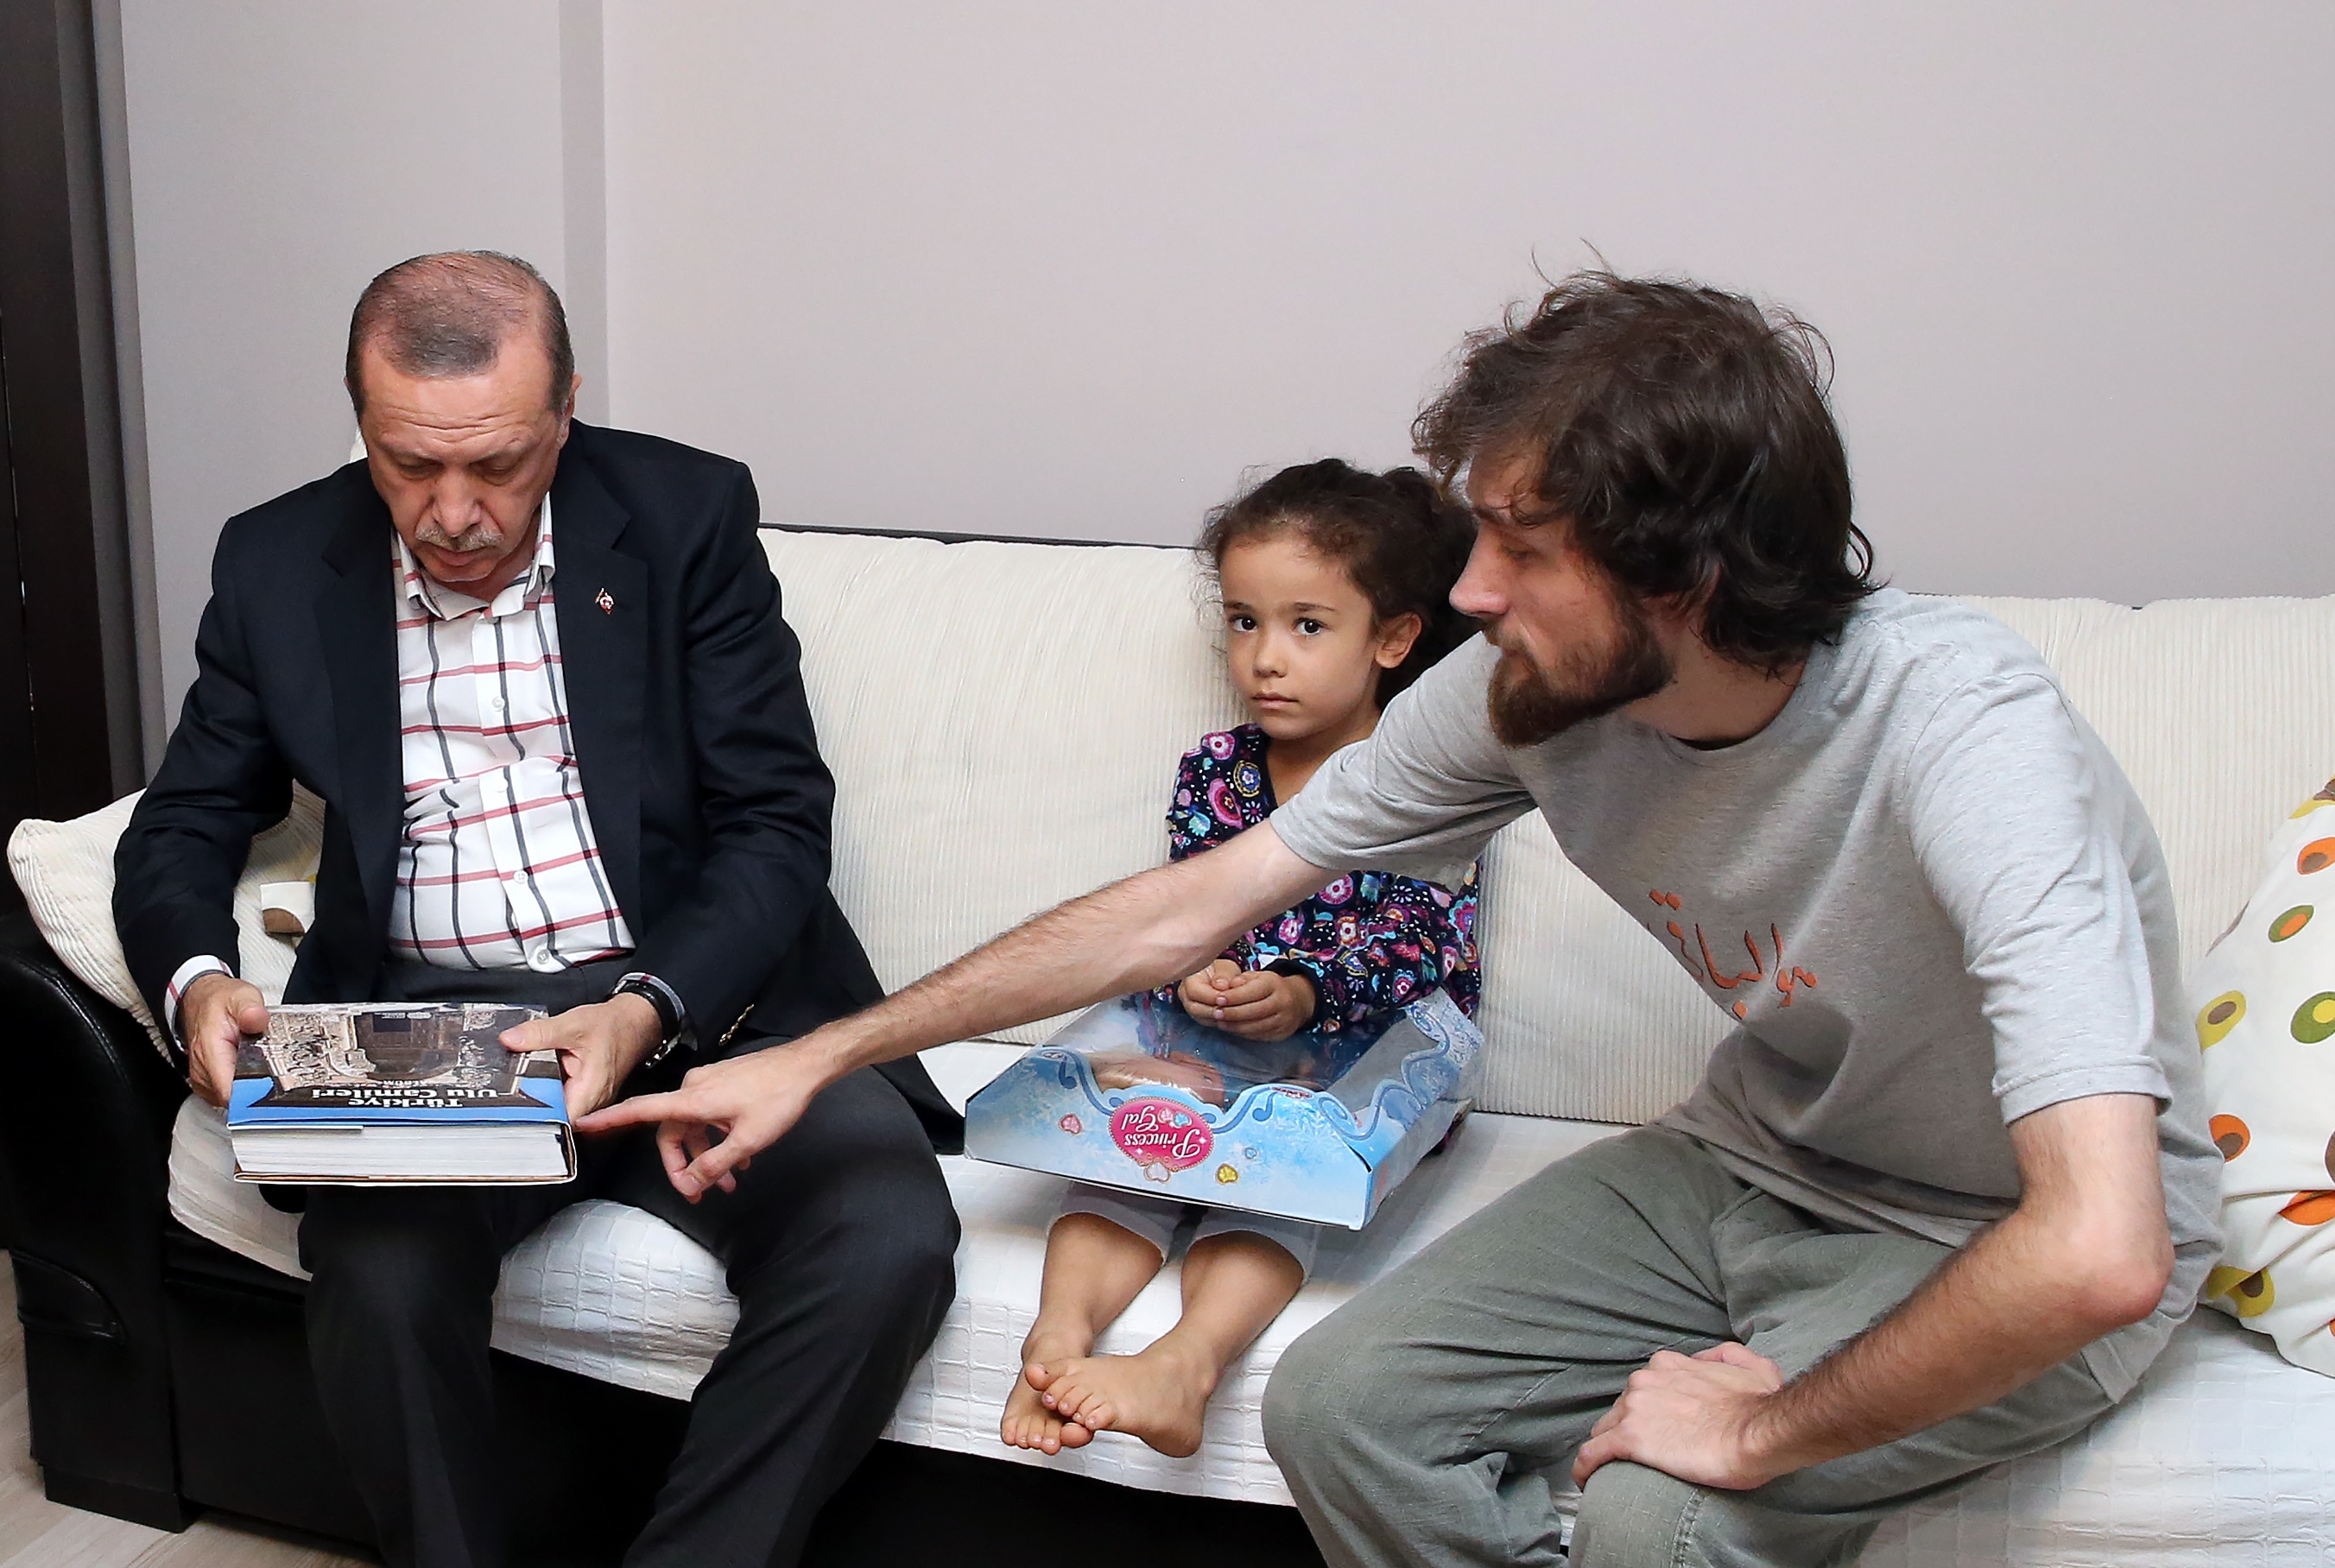 Cambaz’s son Alparsan gave President Erdoğan with details on his father’s book, “Grand Mosques of Turkey”.